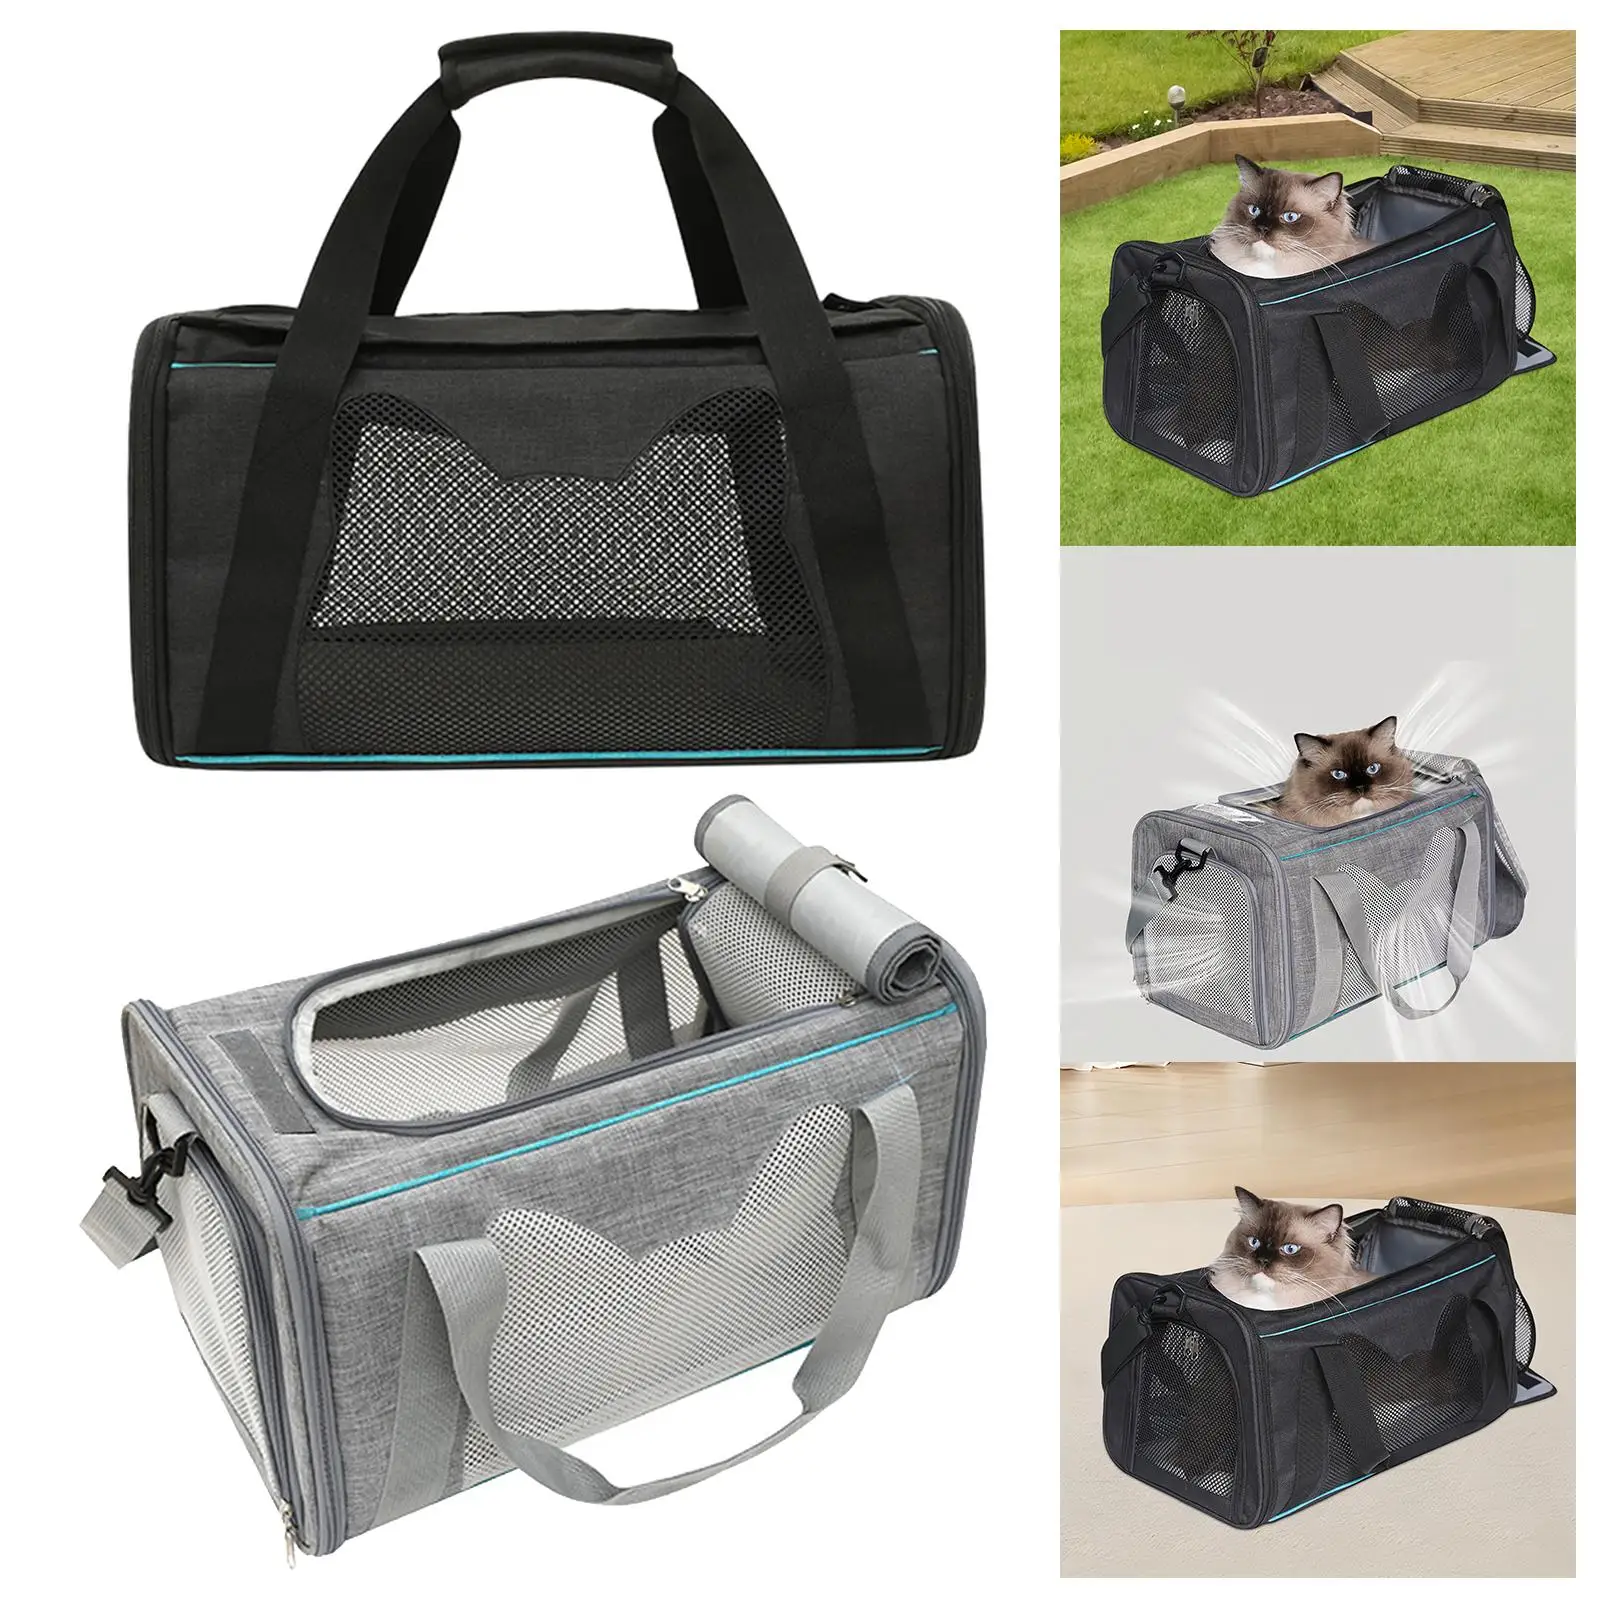 Portable Cat Carrier Folding Side and Top Opening Lightweight Shoulder Bag Travel Dogs Carrier for Puppy Bunny Rabbit Kitten